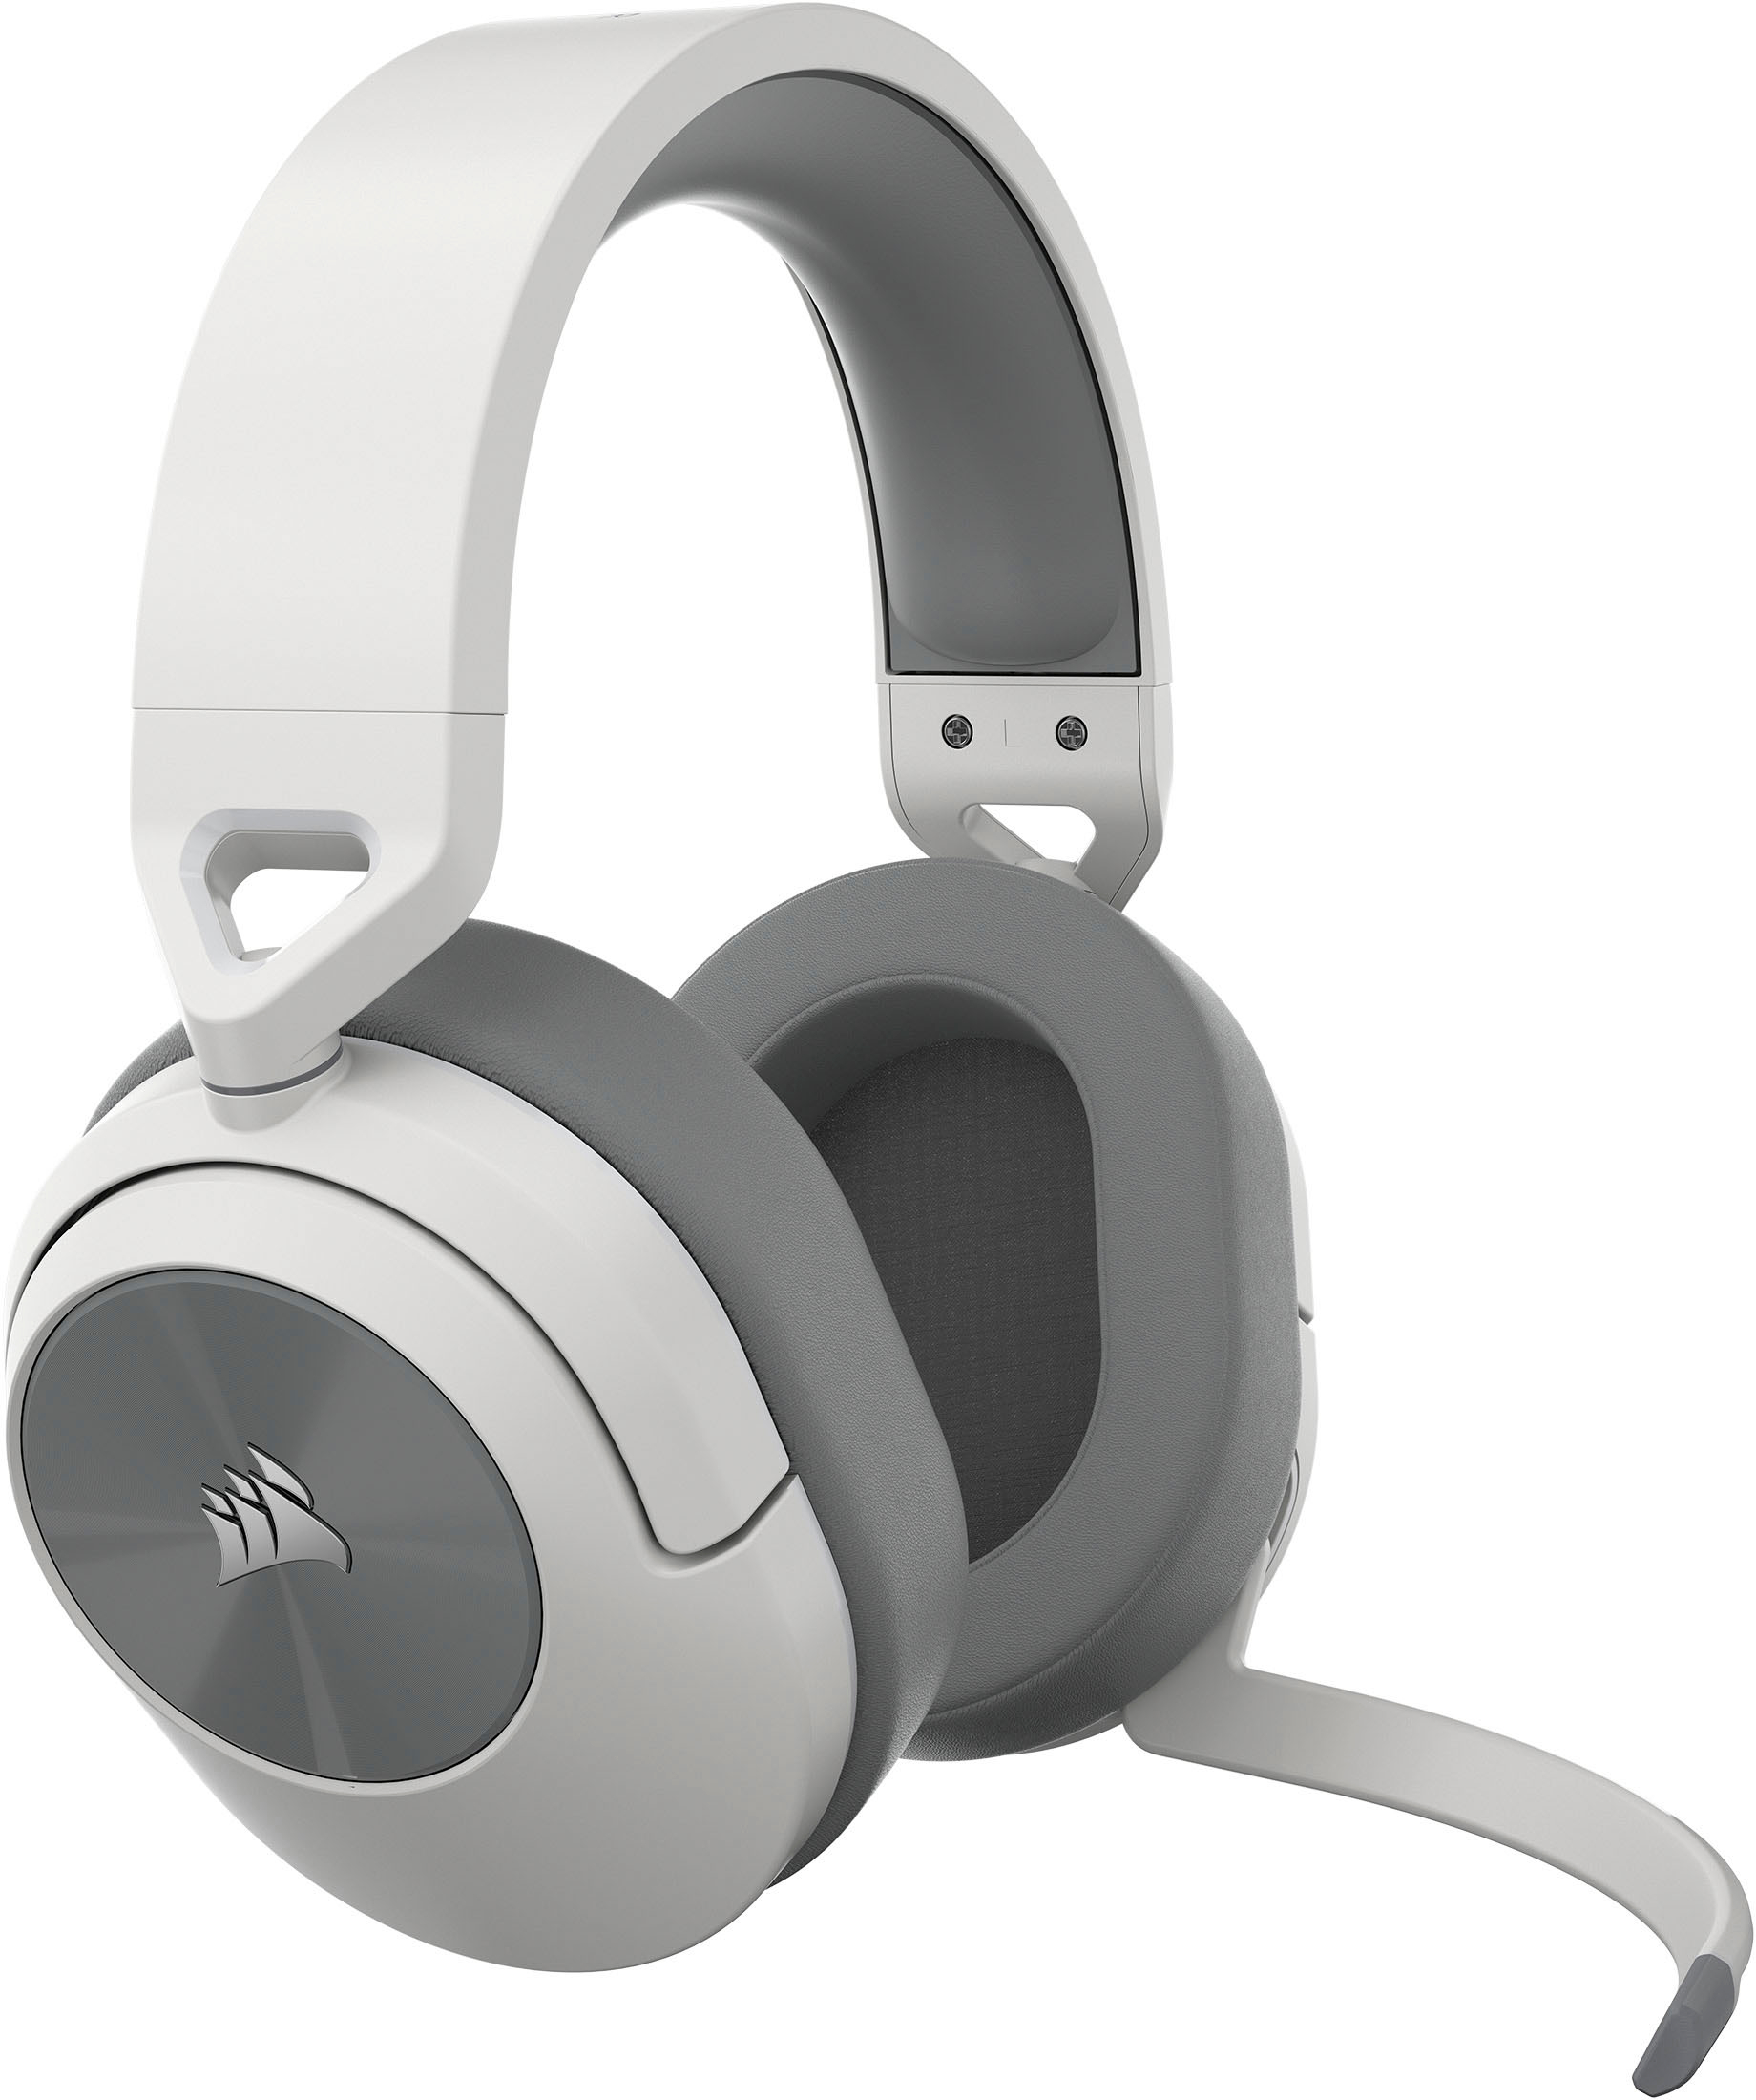 CORSAIR HS for CA-9011281-NA Series Best HS55 PS5, and White - Wireless Headset PC, Mobile Gaming Buy